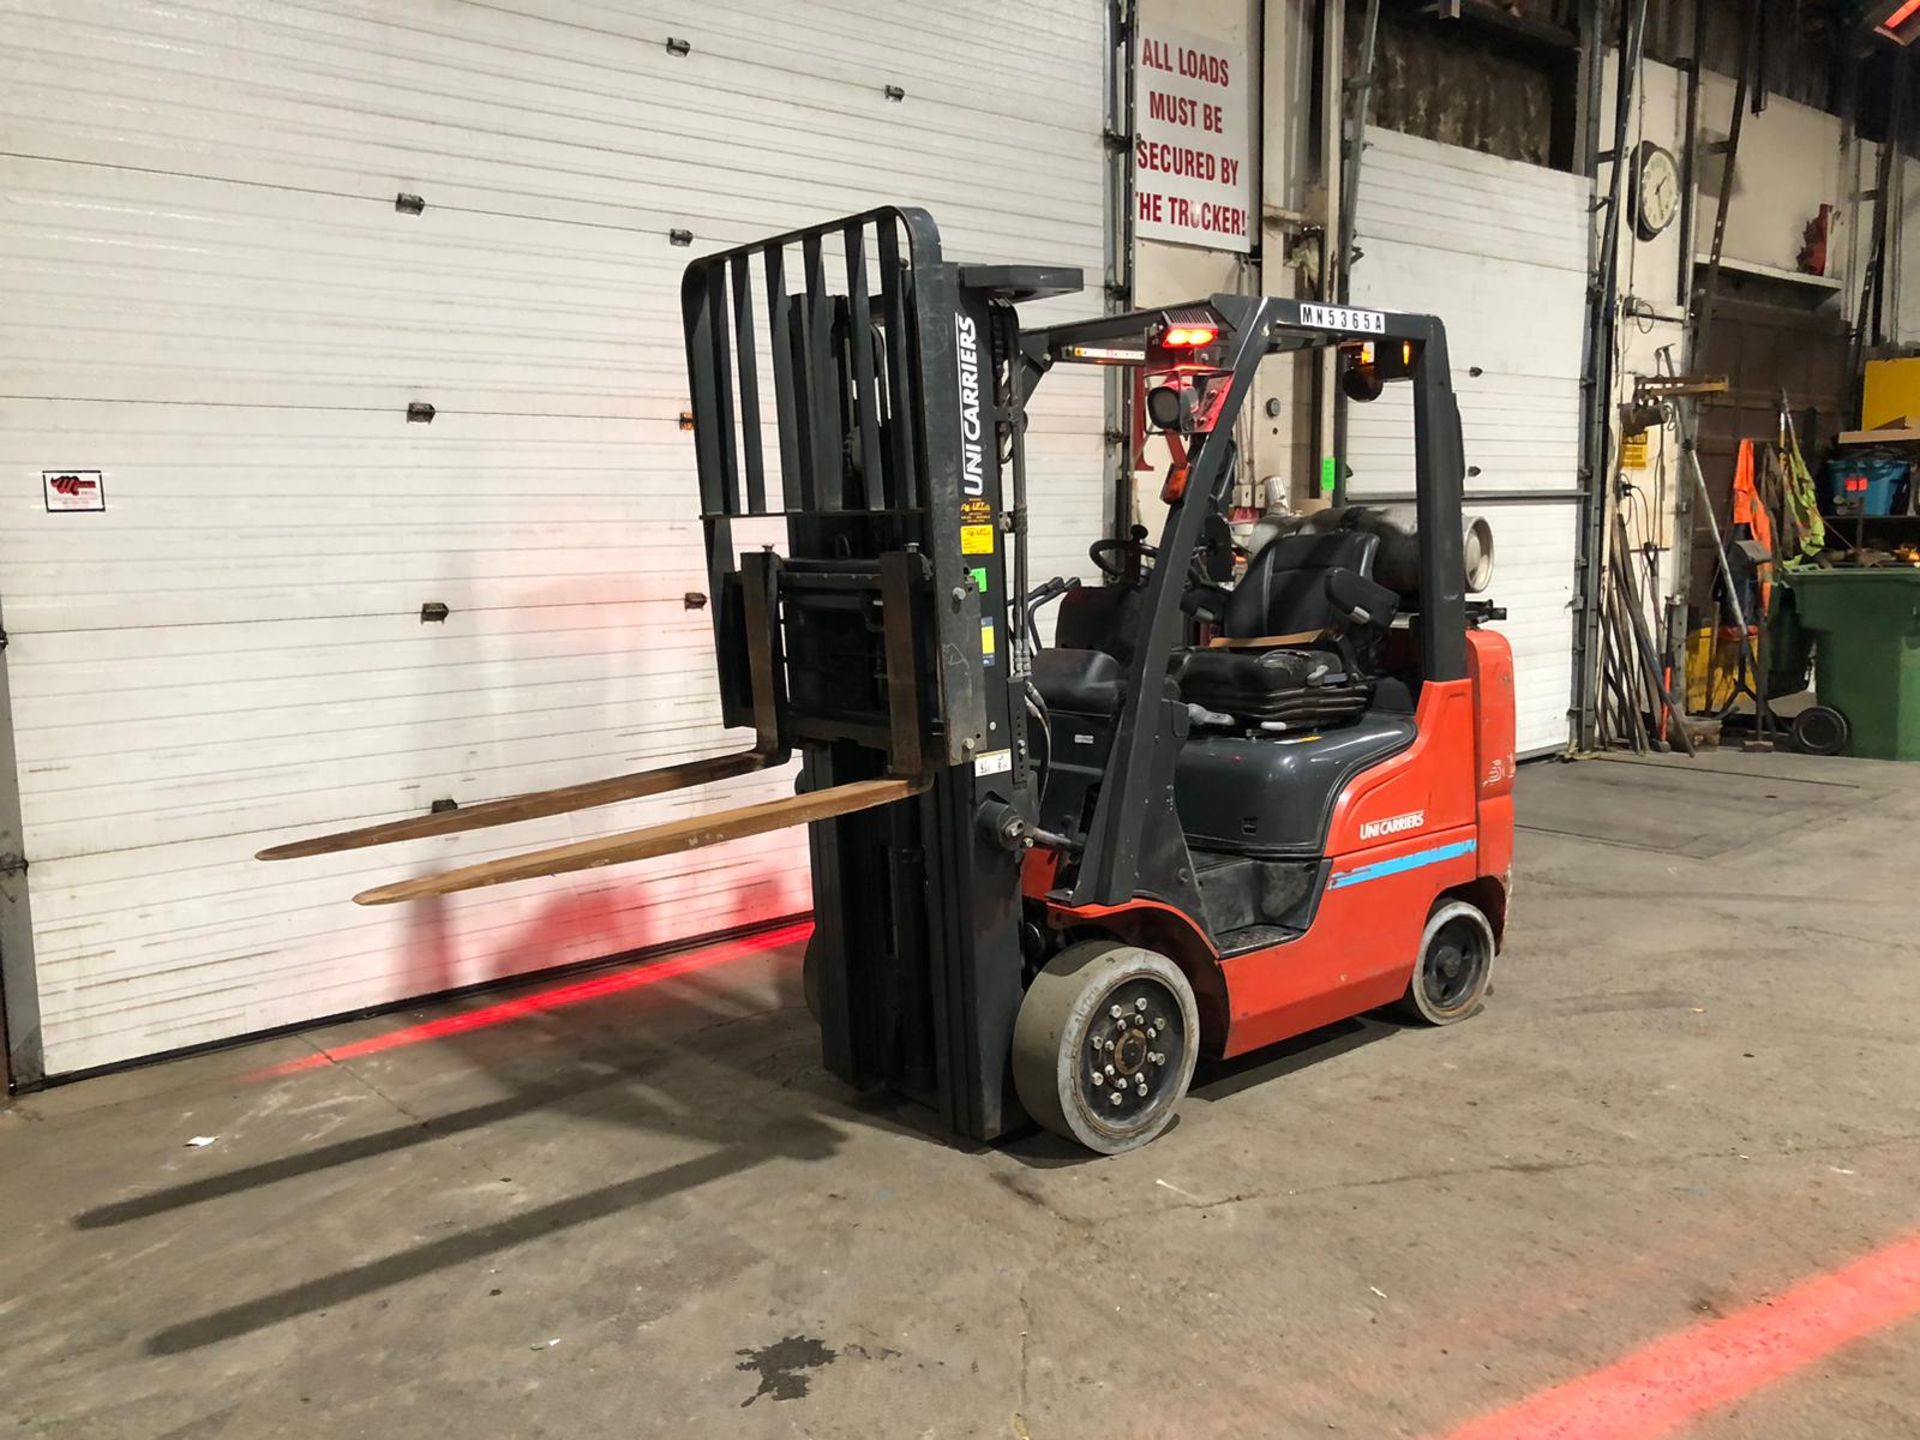 2020 Nissan Unicarrier 5,000lbs Capacity Forklift LPG (propane) WITH VERY LOW HOURS & Sideshift & - Image 2 of 5